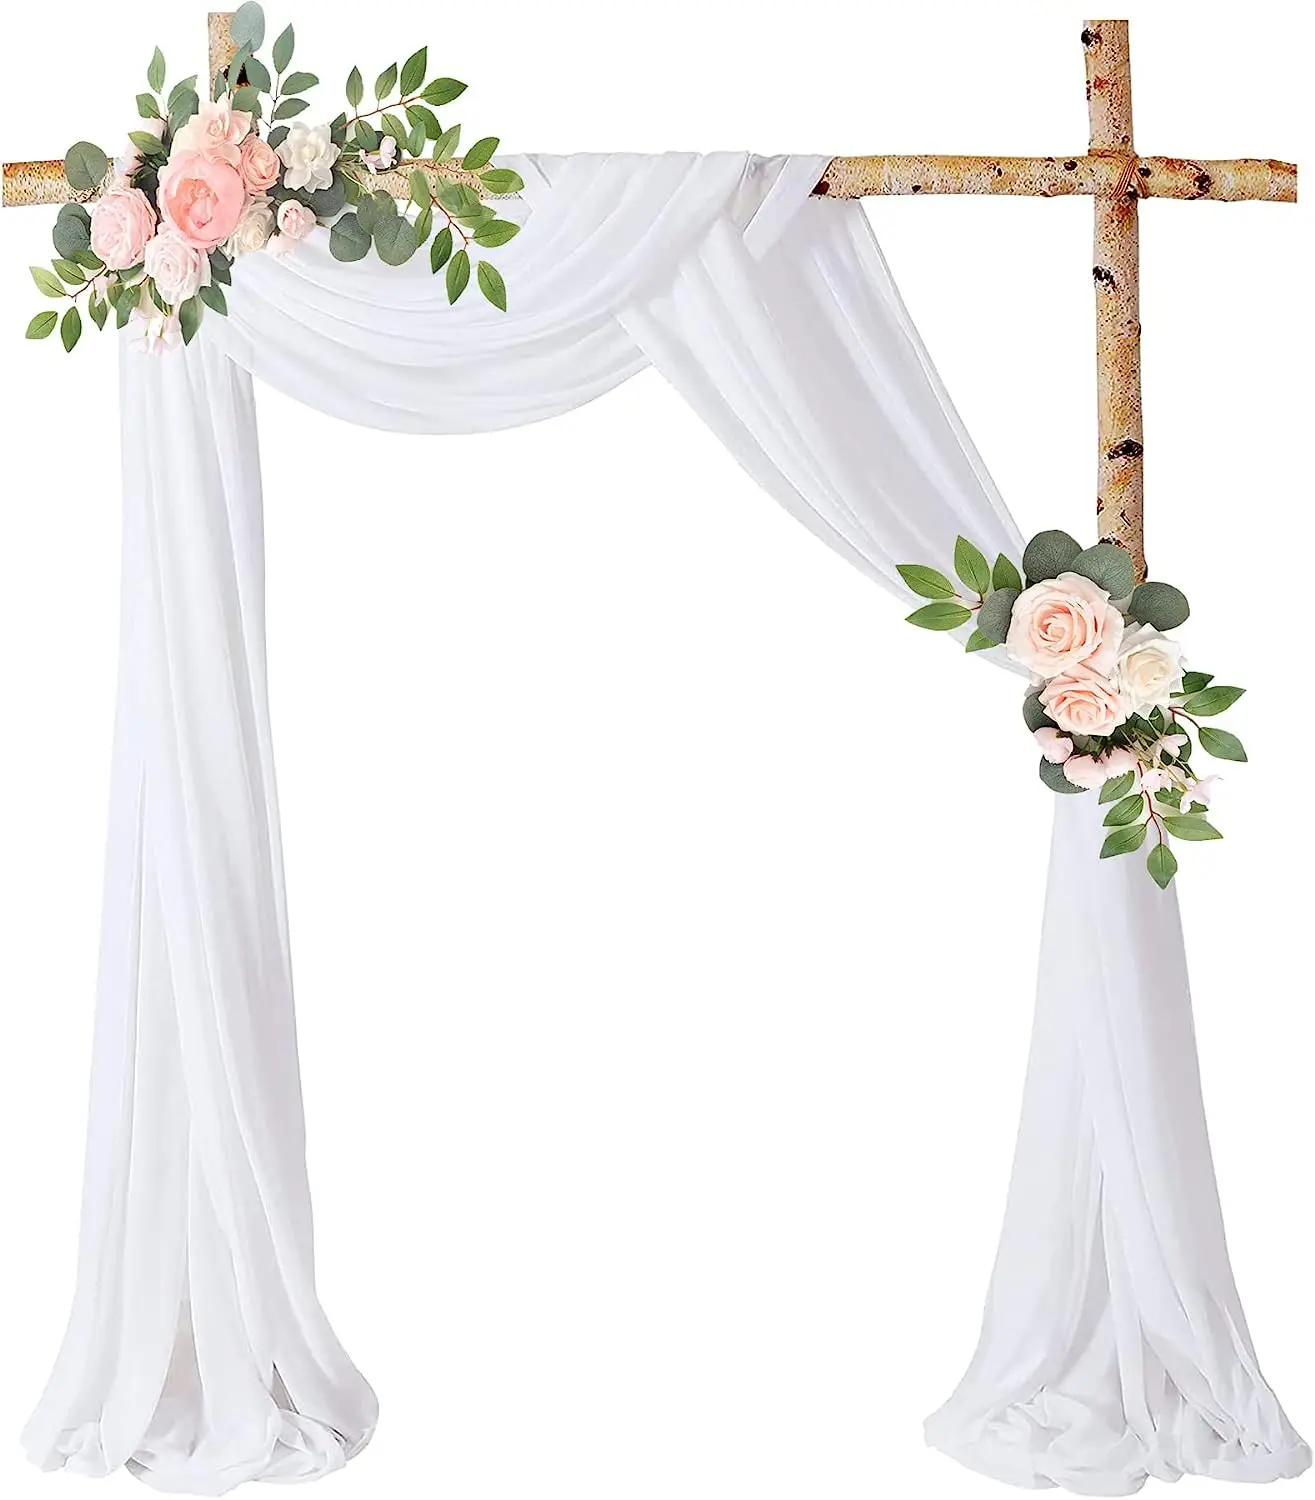 

Wedding Arch Draping, Drapery Decorations for Ceremony Reception Party Ceiling, Backdrop Curtains, 2 Panels, 6 Meters